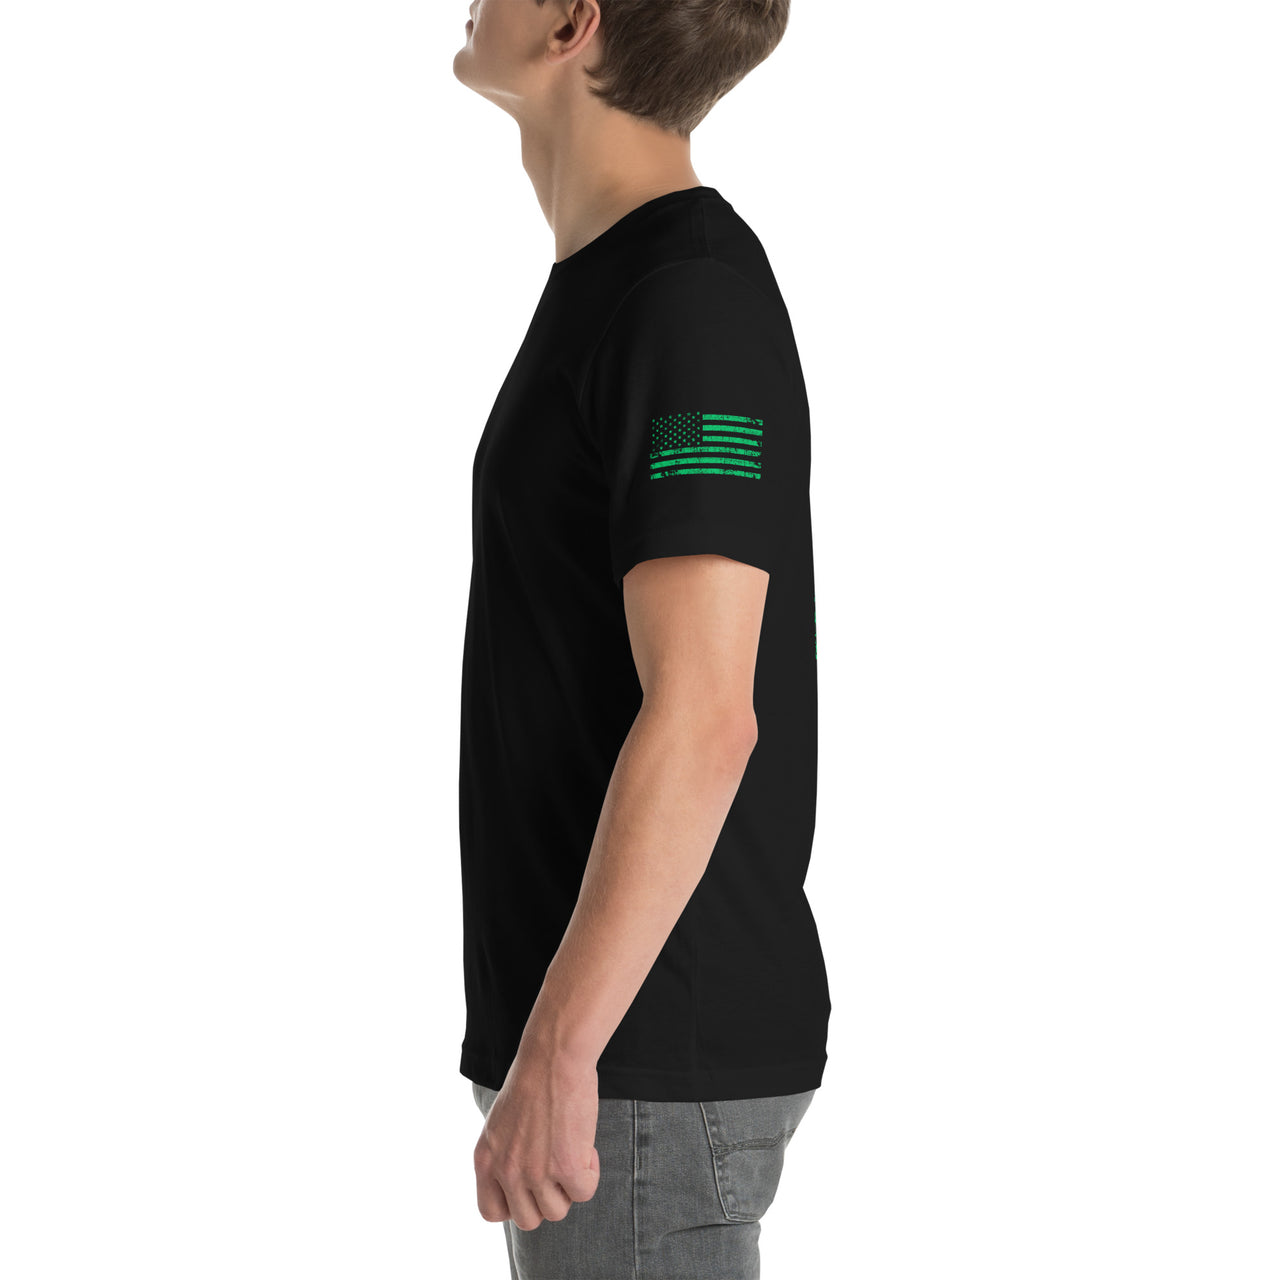 Celtic Cross T-Shirt With 4 Leaf Clover And American Flag modeled in black side view